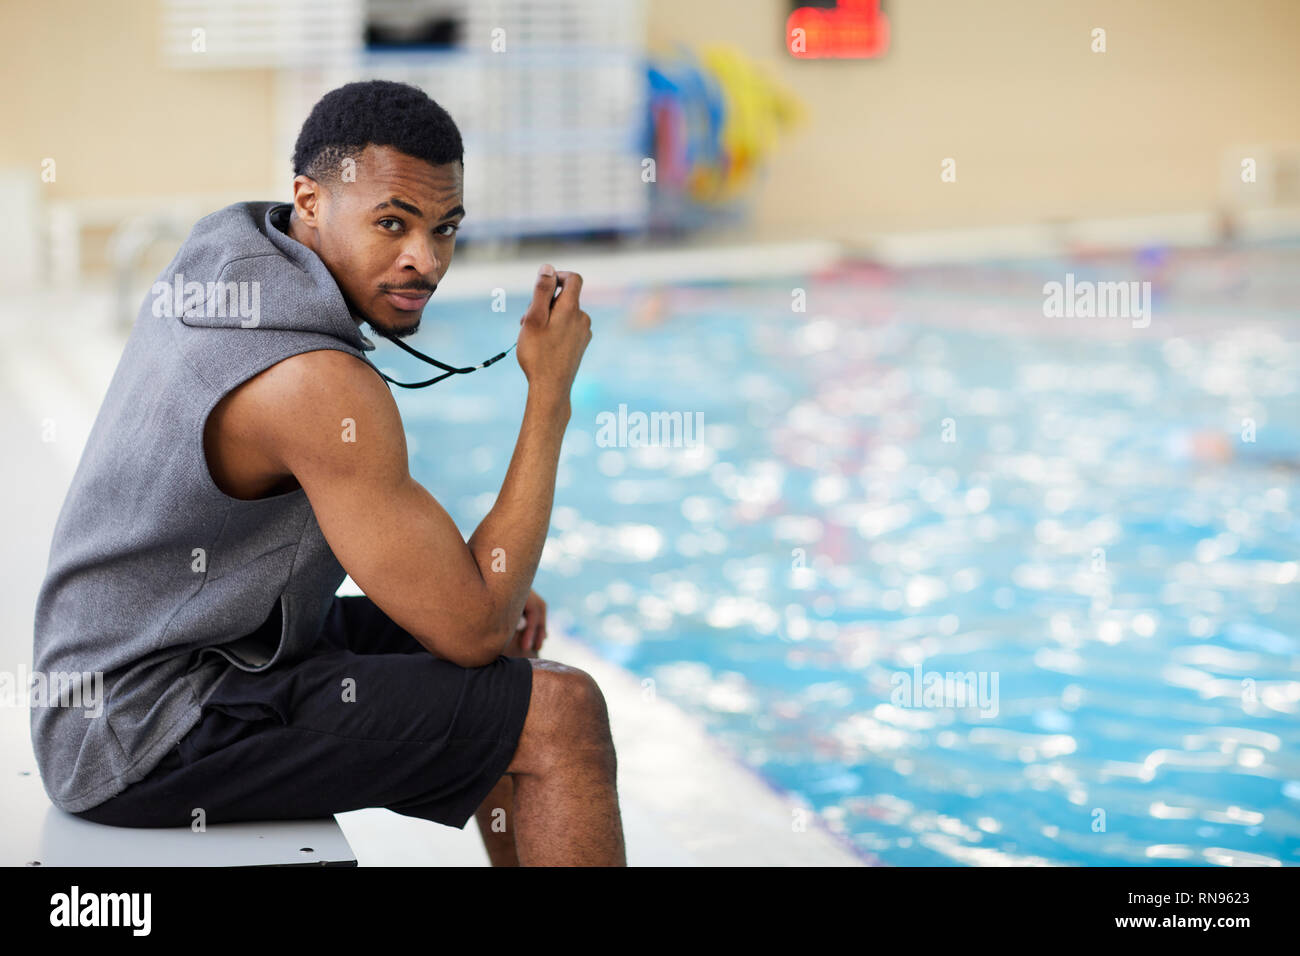 Handsome Fitness Instructor in Swimming Pool Stock Photo